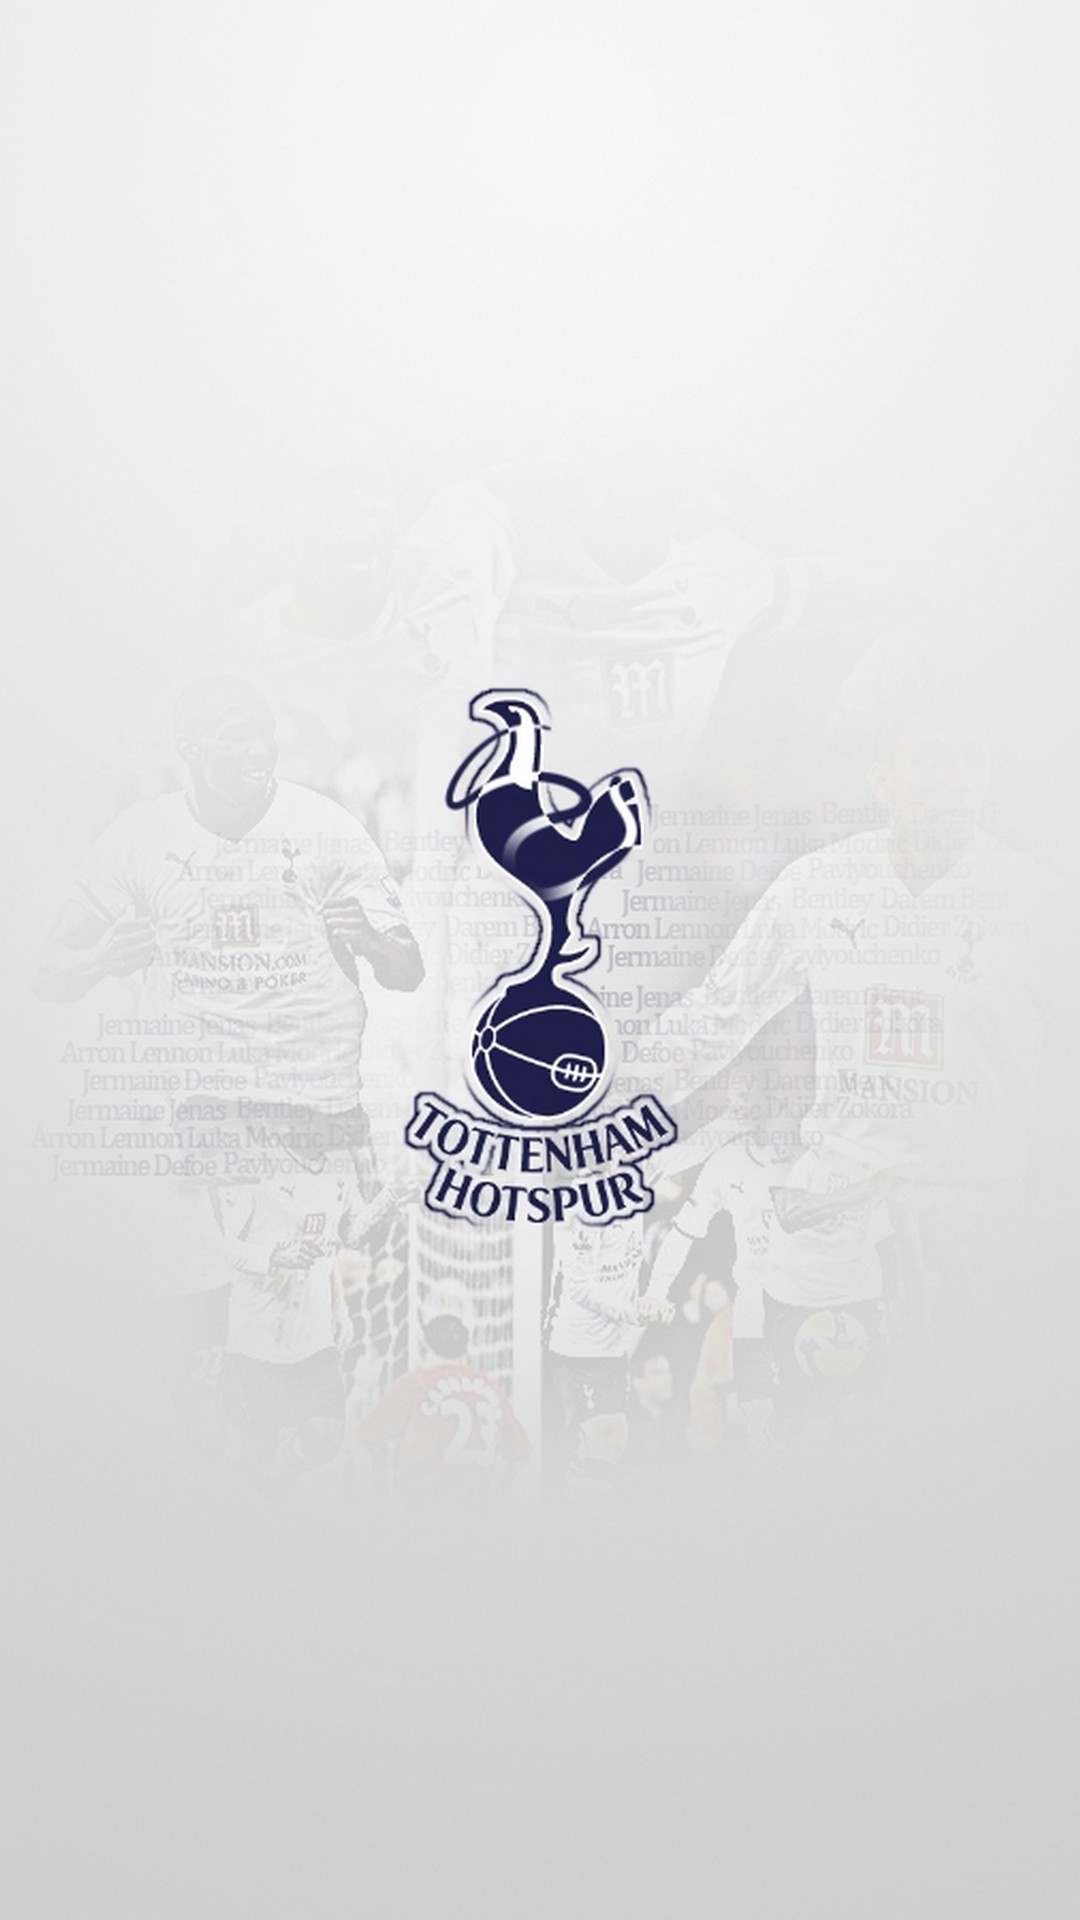 iPhone Wallpaper HD Tottenham Hotspur With high-resolution 1080X1920 pixel. You can use this wallpaper for your Desktop Computers, Mac Screensavers, Windows Backgrounds, iPhone Wallpapers, Tablet or Android Lock screen and another Mobile device